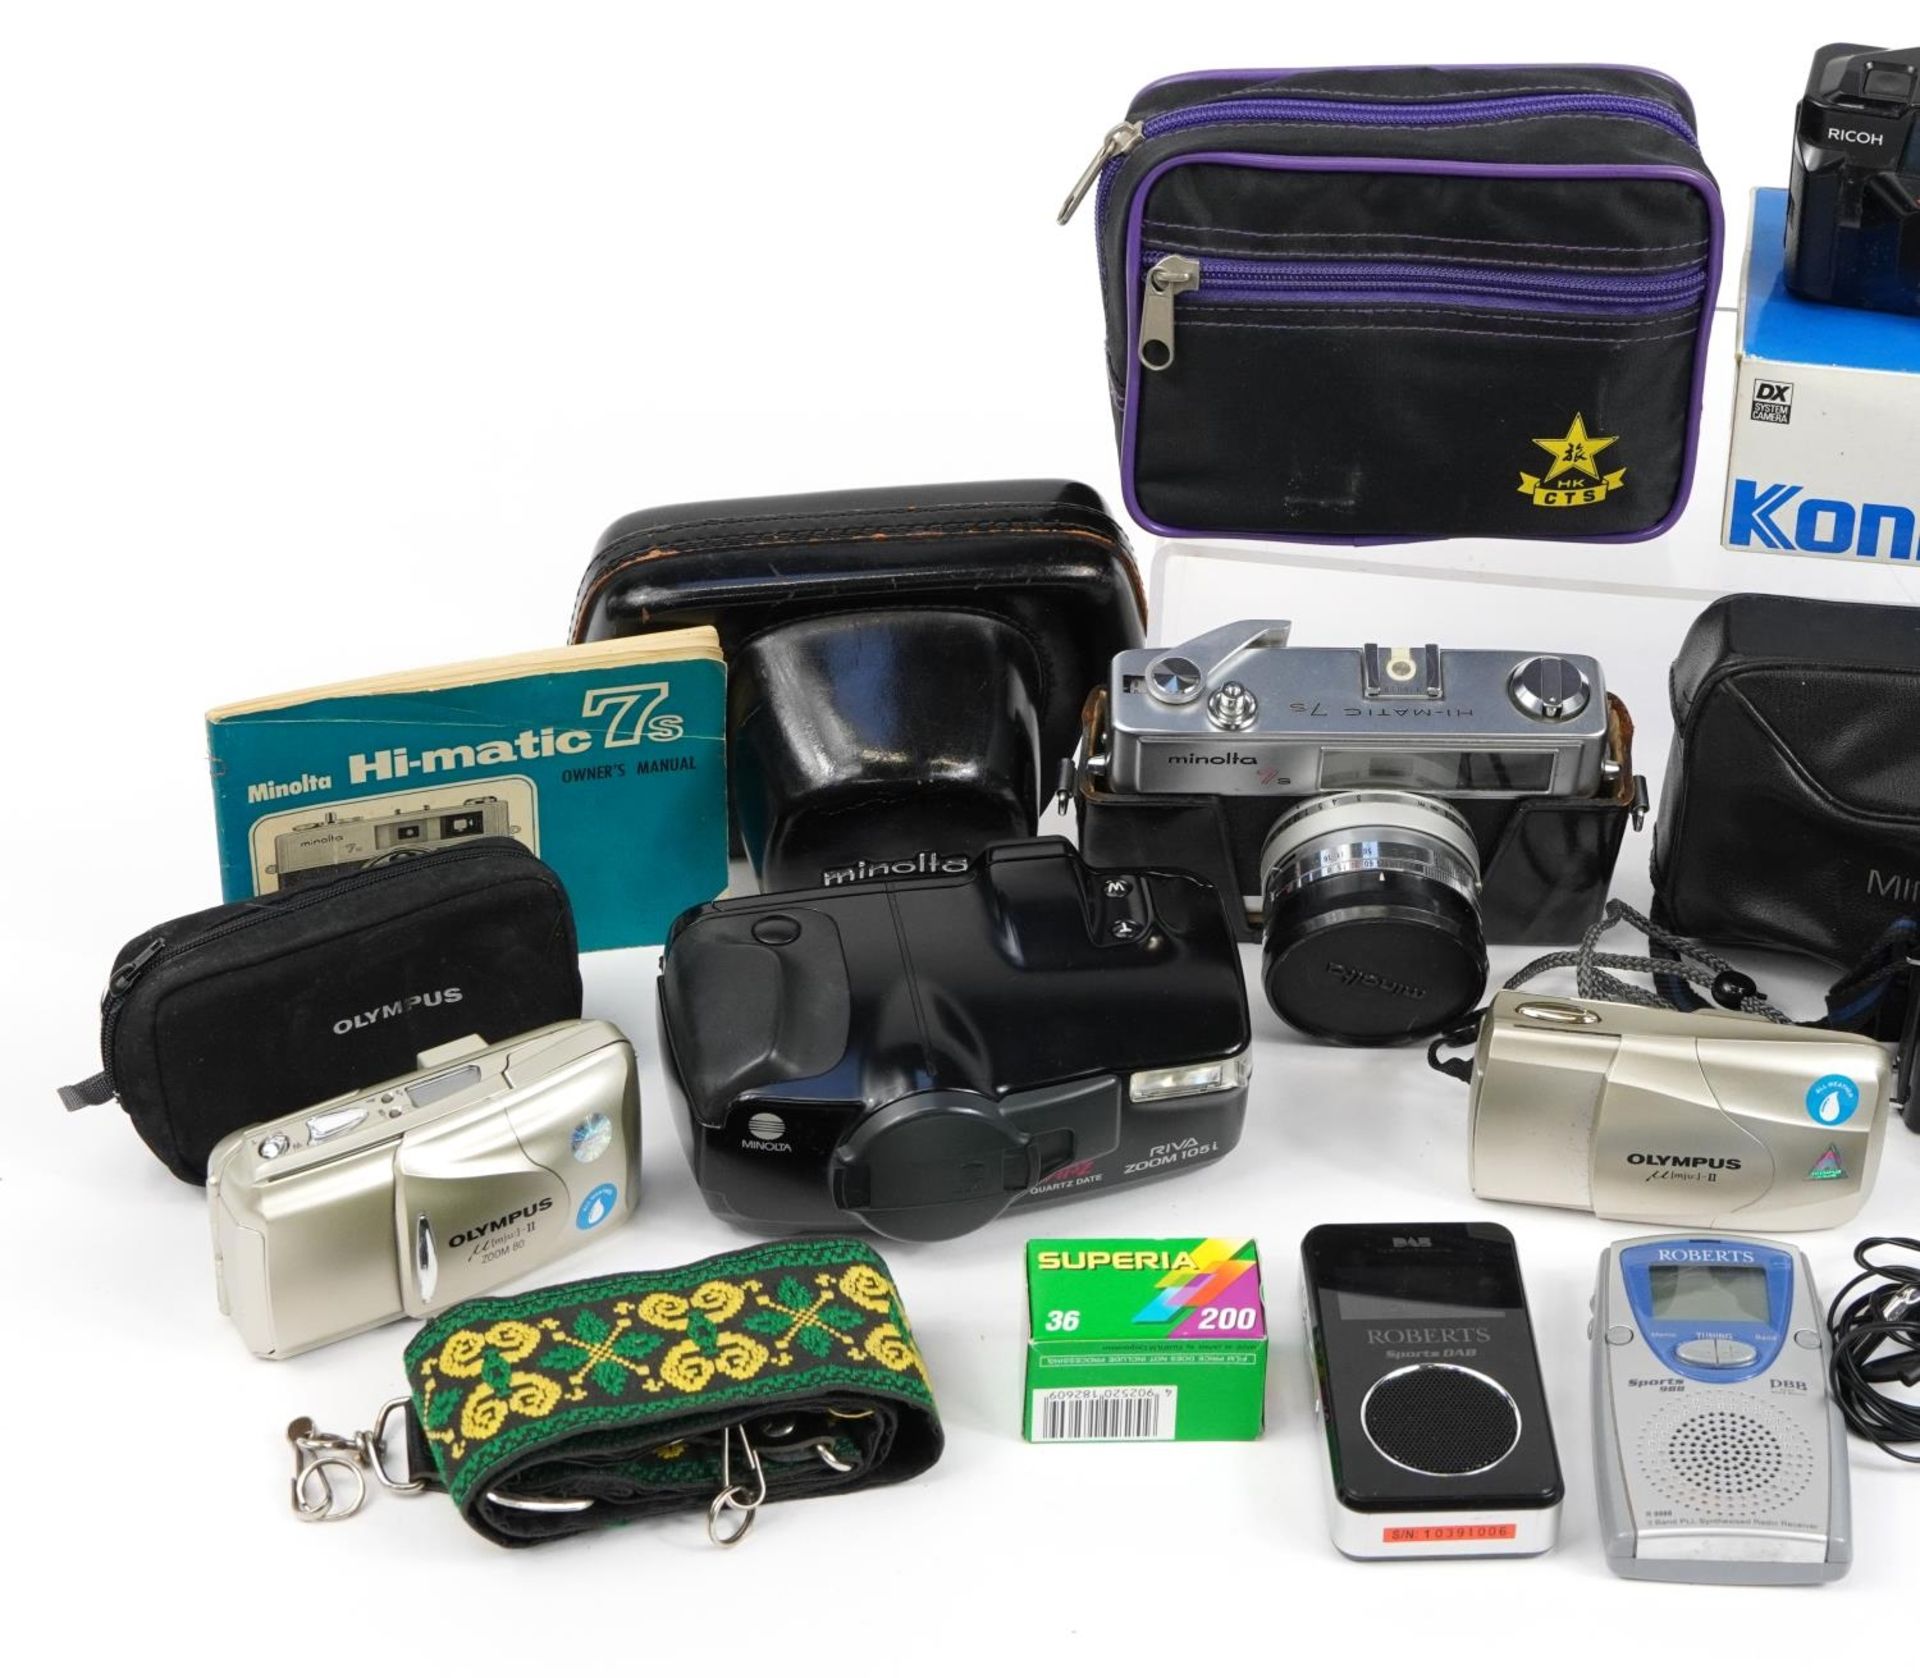 Vintage and later cameras, accessories and radios including Minolta and Roberts - Image 2 of 3